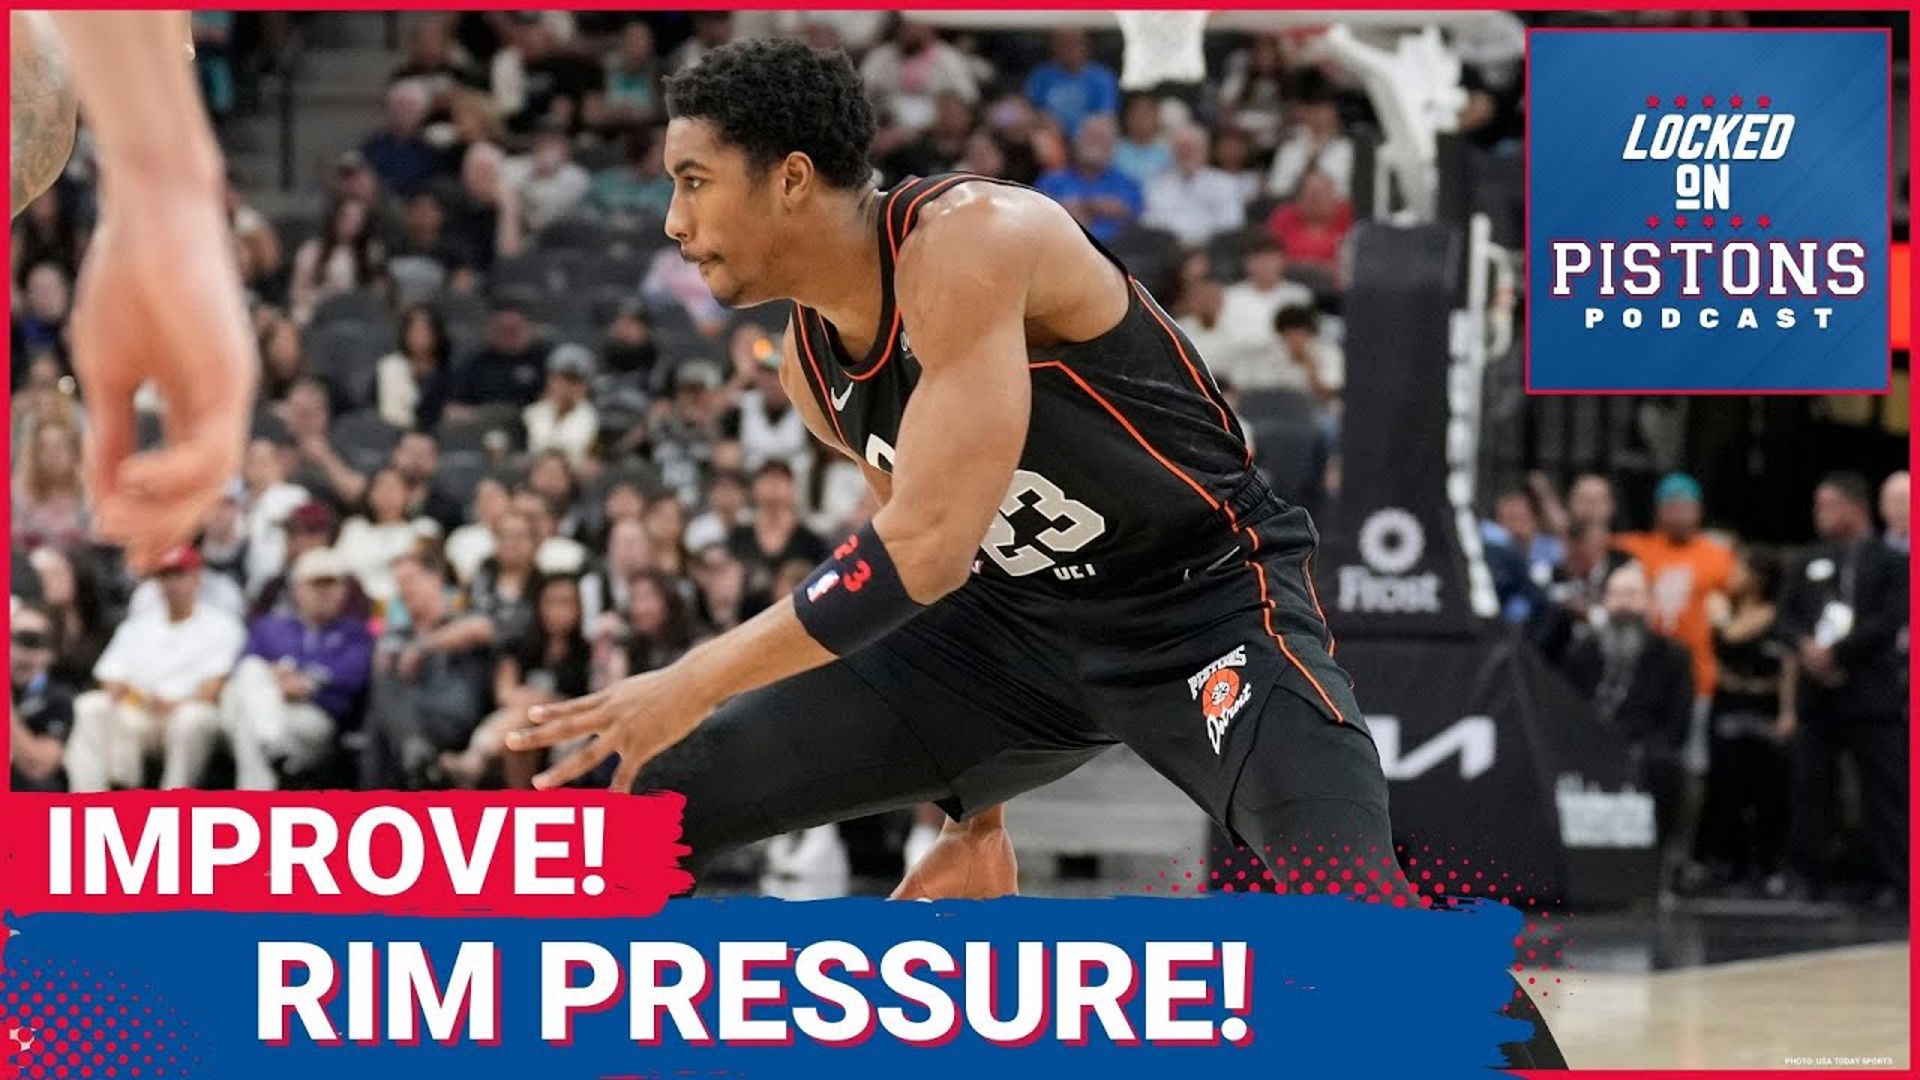 Jaden Ivey will find himself in a lot of trade rumors for the Detroit Pistons this offseason. The best pathway to being a impactful player is rim pressure